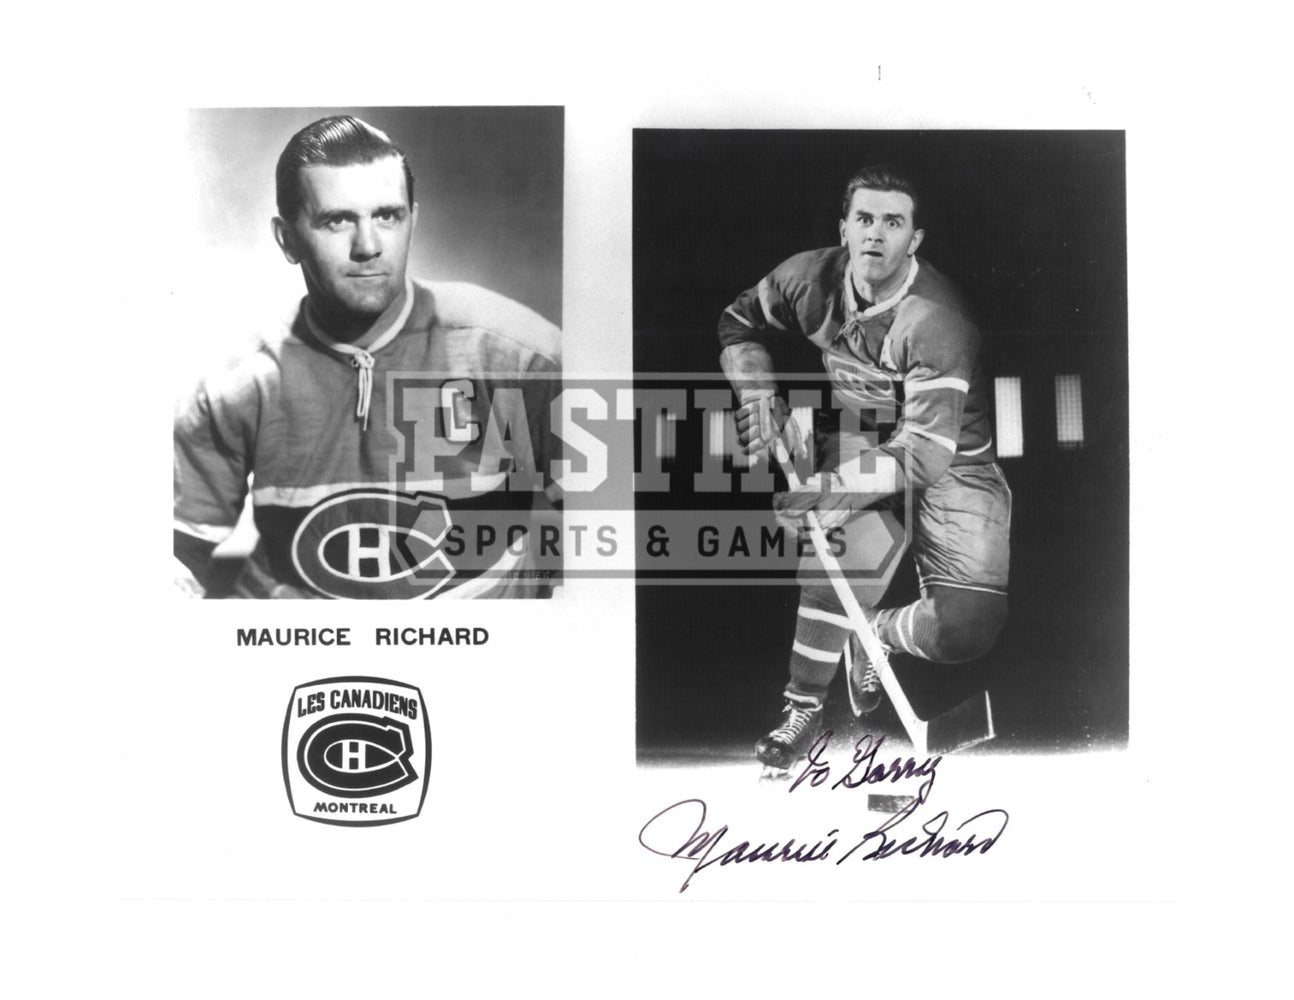 Maurice "Rocket" Richard Autographed 8X10 Montreal Canadians (To Garry) - Pastime Sports & Games